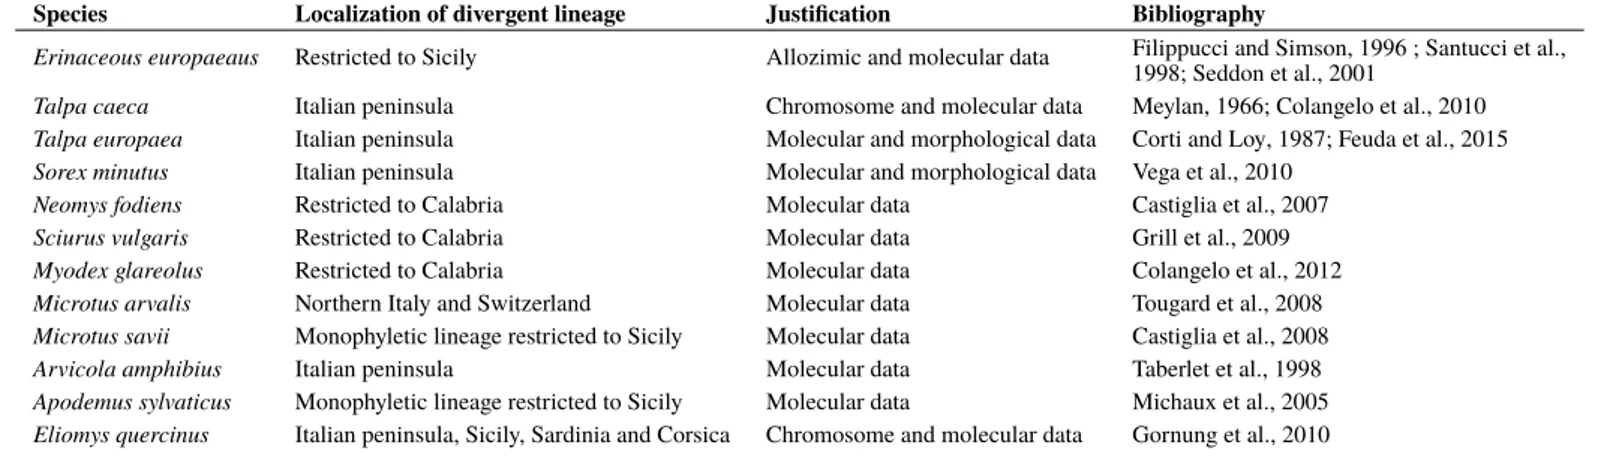 Table 3 – Divergent lineages of Italian small mammals.